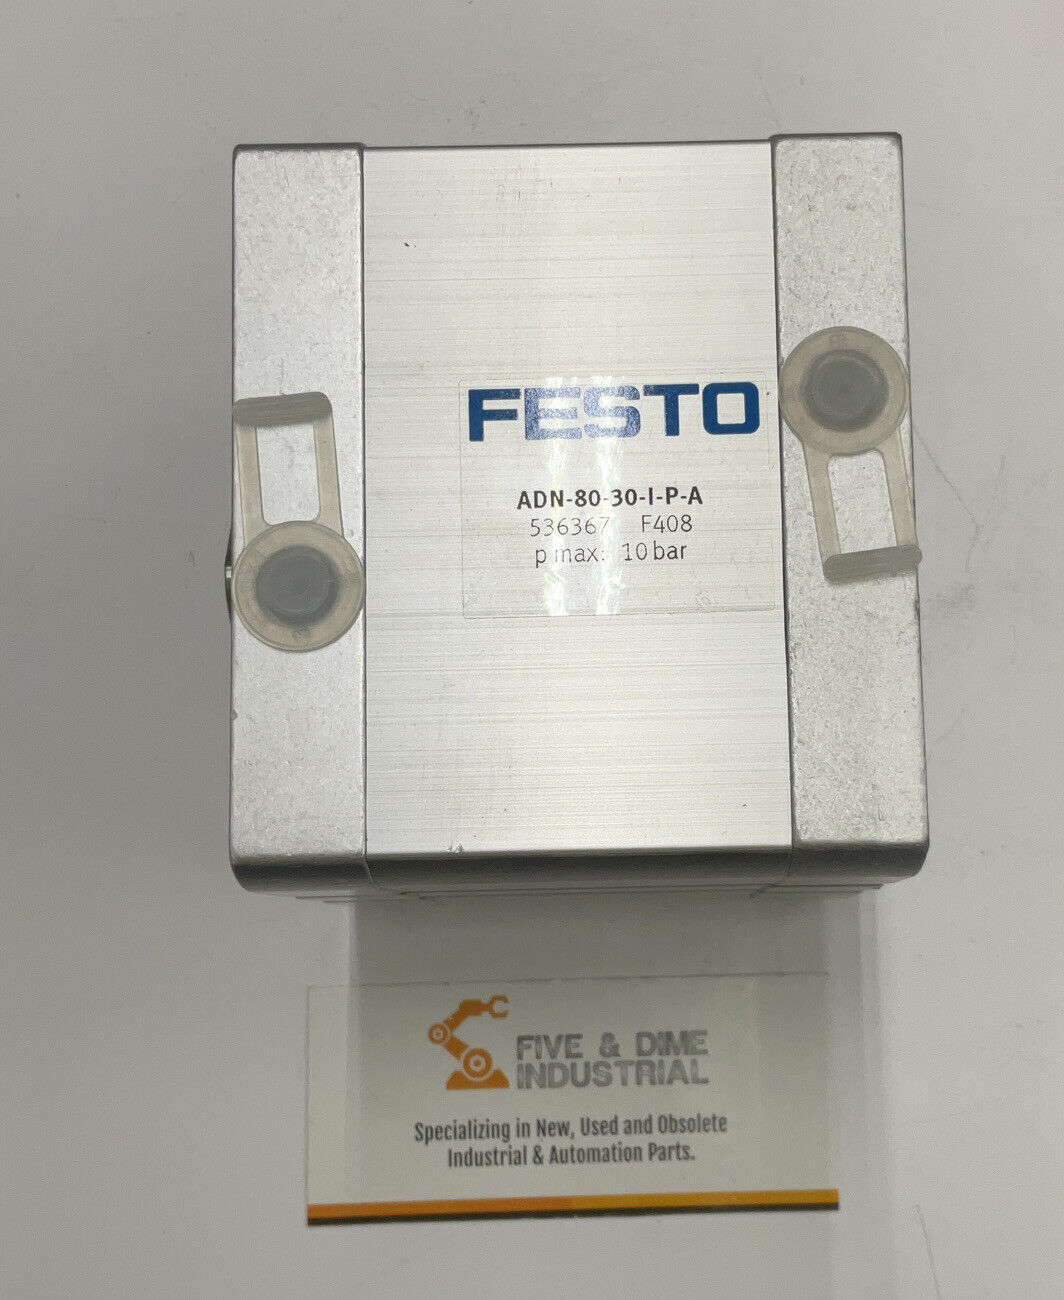 Festo ADN-80-30-I-P-A  New Compact Air Cylinder 536367 (CL338)